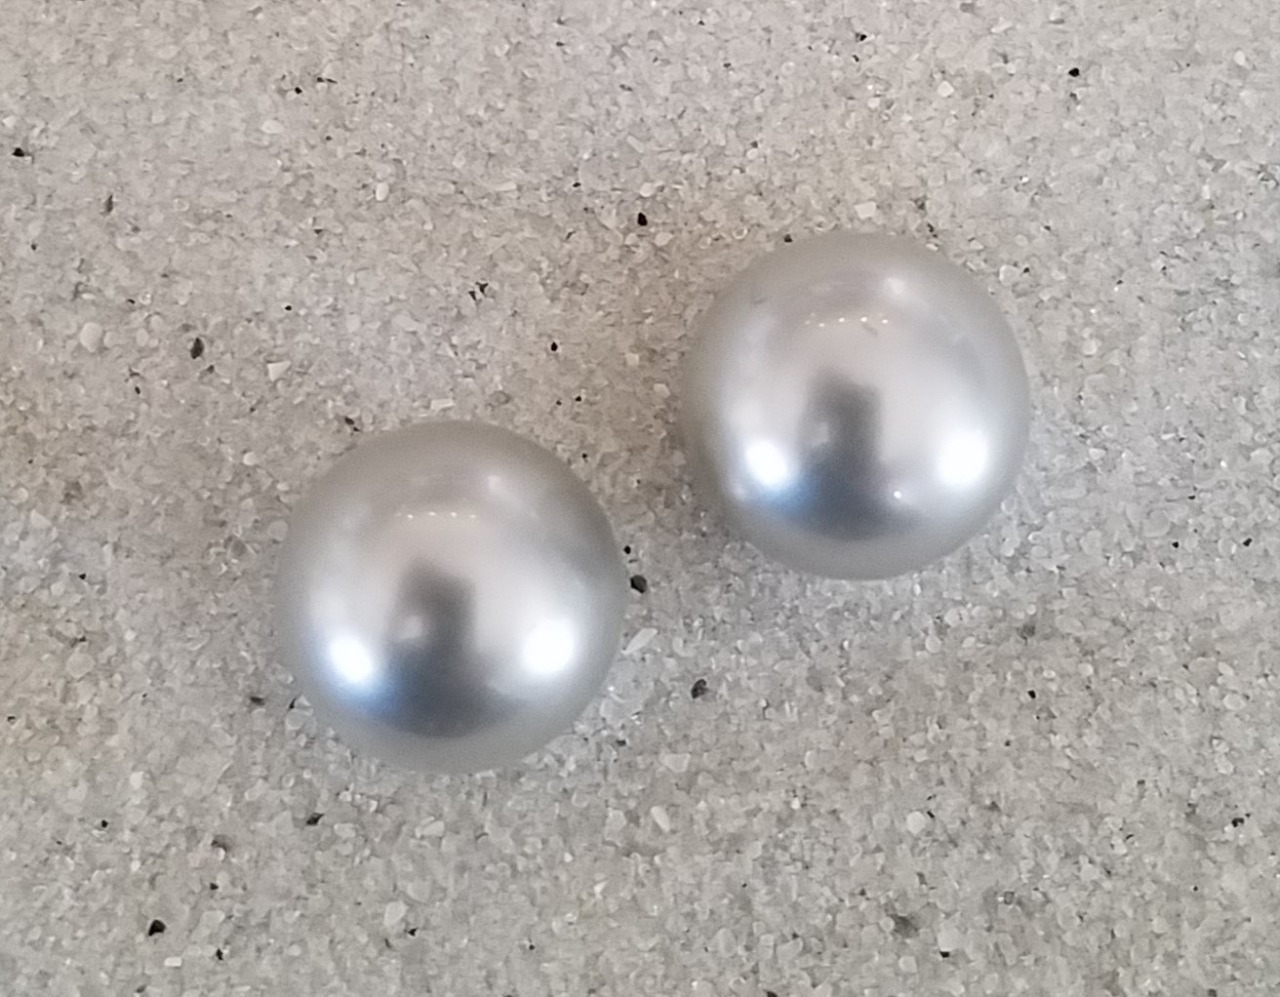 10 mm Silver Mabe Pearl Post Earrings